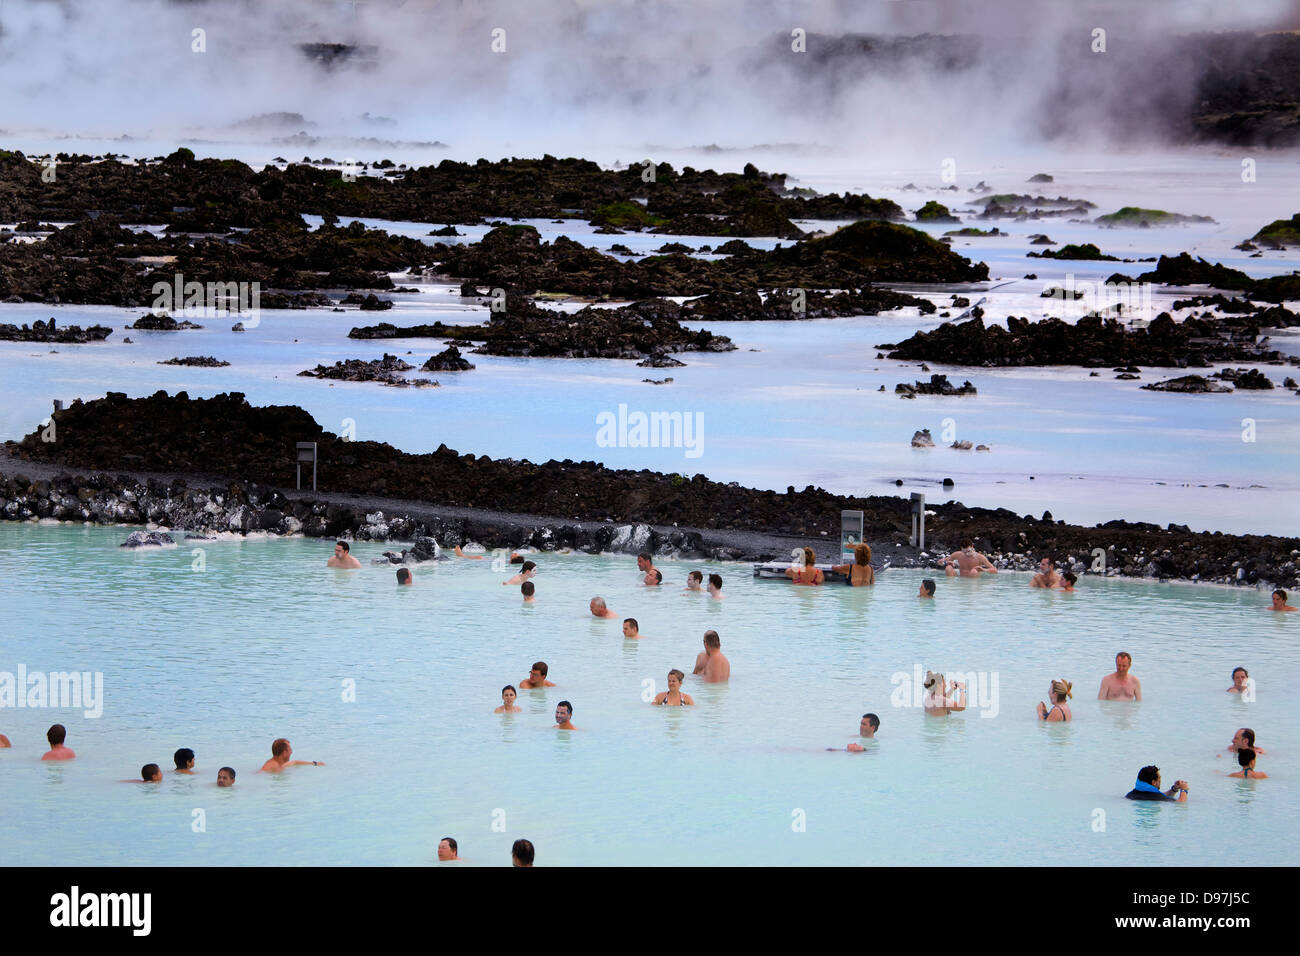 The Blue Lagoon geothermal spa in Iceland Stock Photo